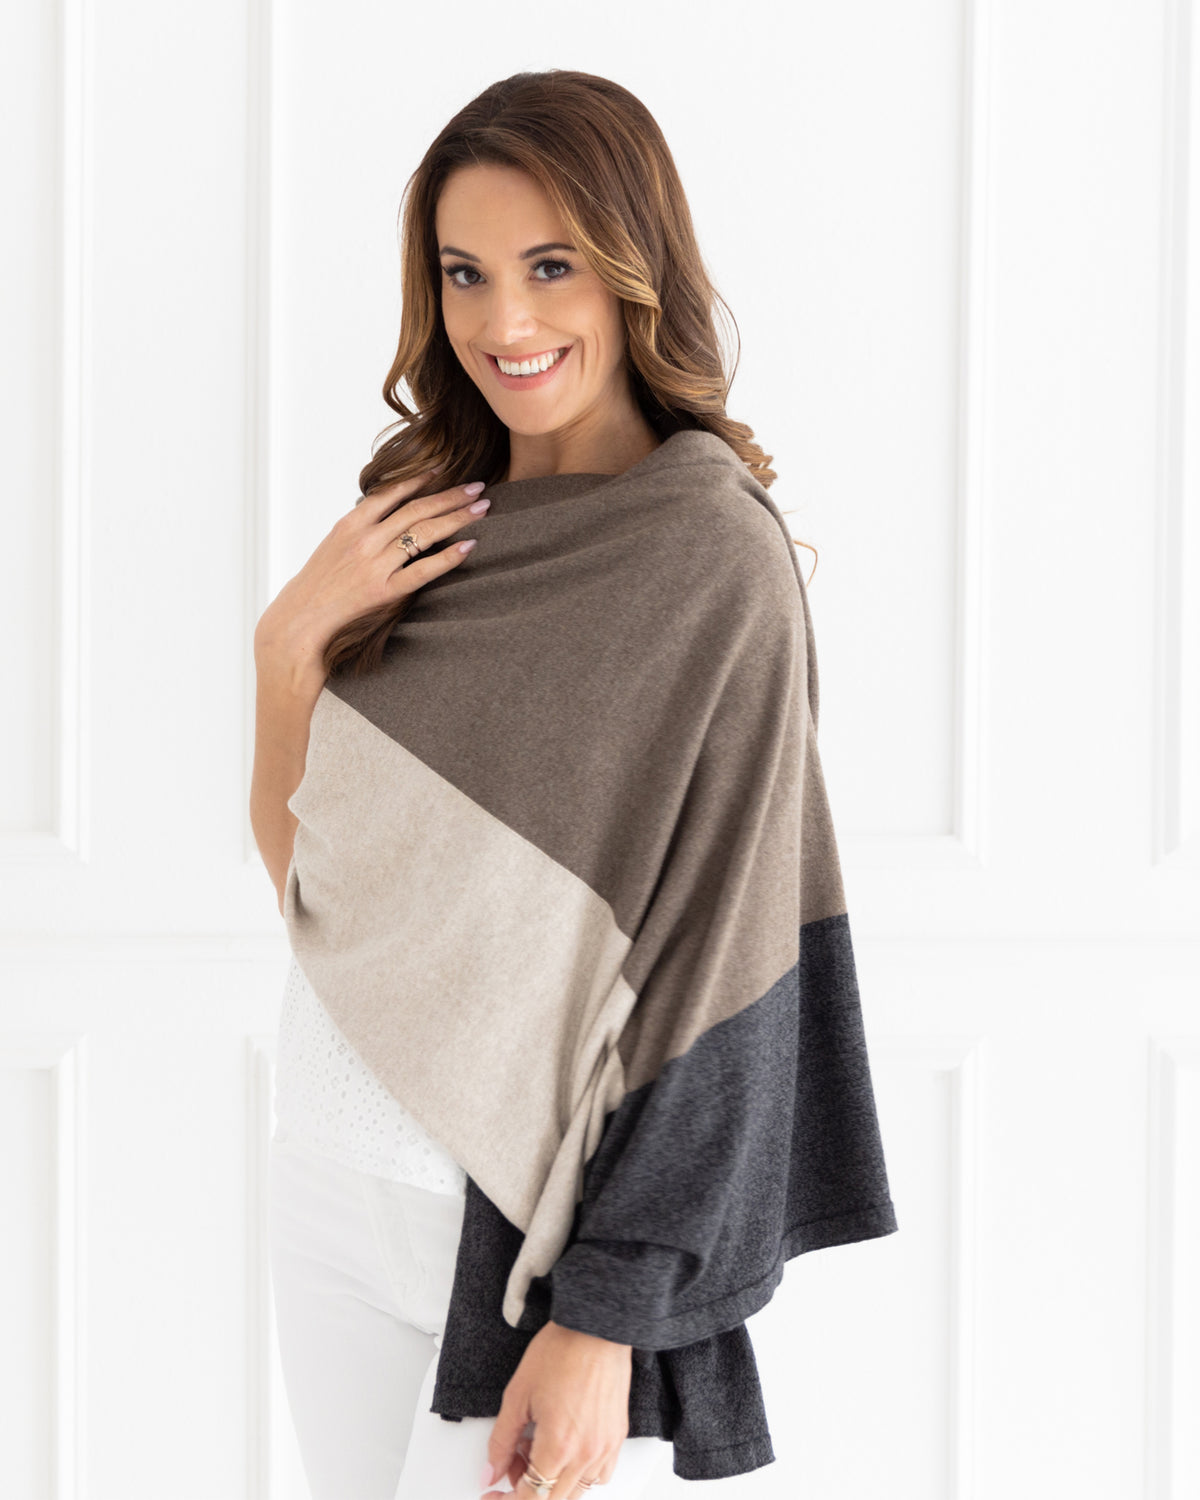 Woman wearing the Dreamsoft Travel Scarf in Brownstone Colorblock which is a brown, tan and gray scarf, worn as a wrap and smiling